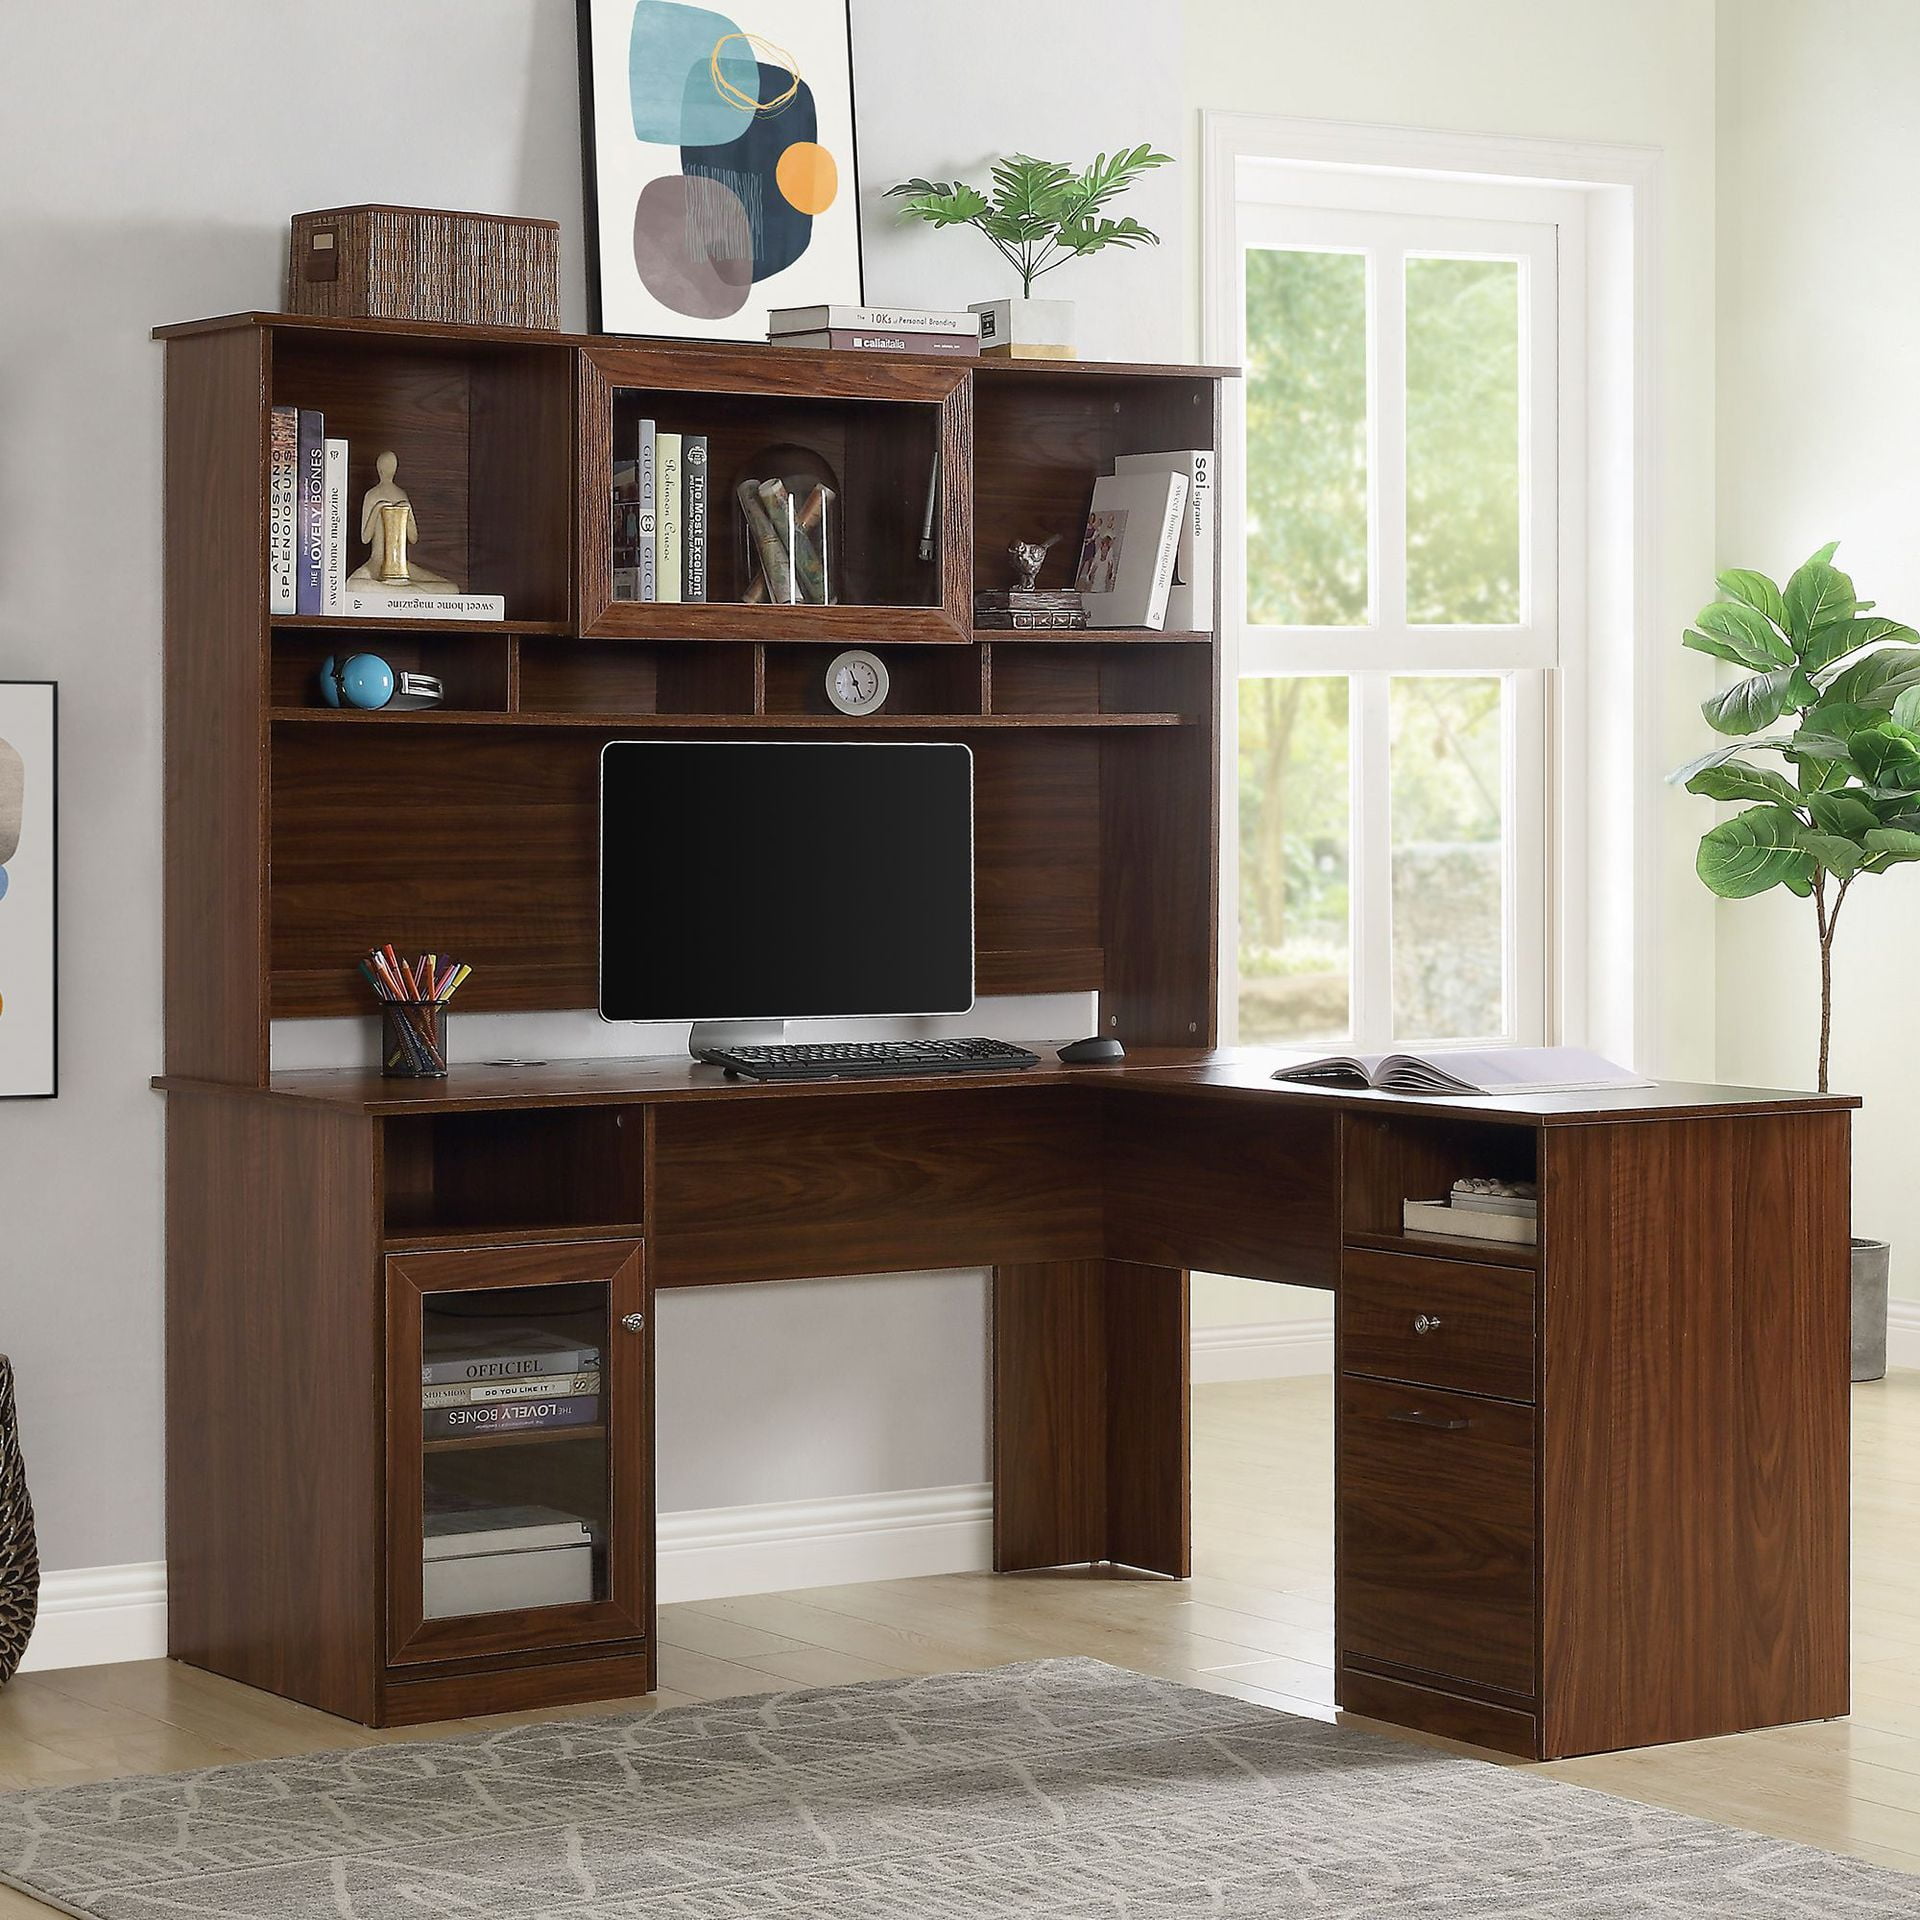 L Shaped Desk With Drawers And Storage Shelves, Brown Wood Writing ...